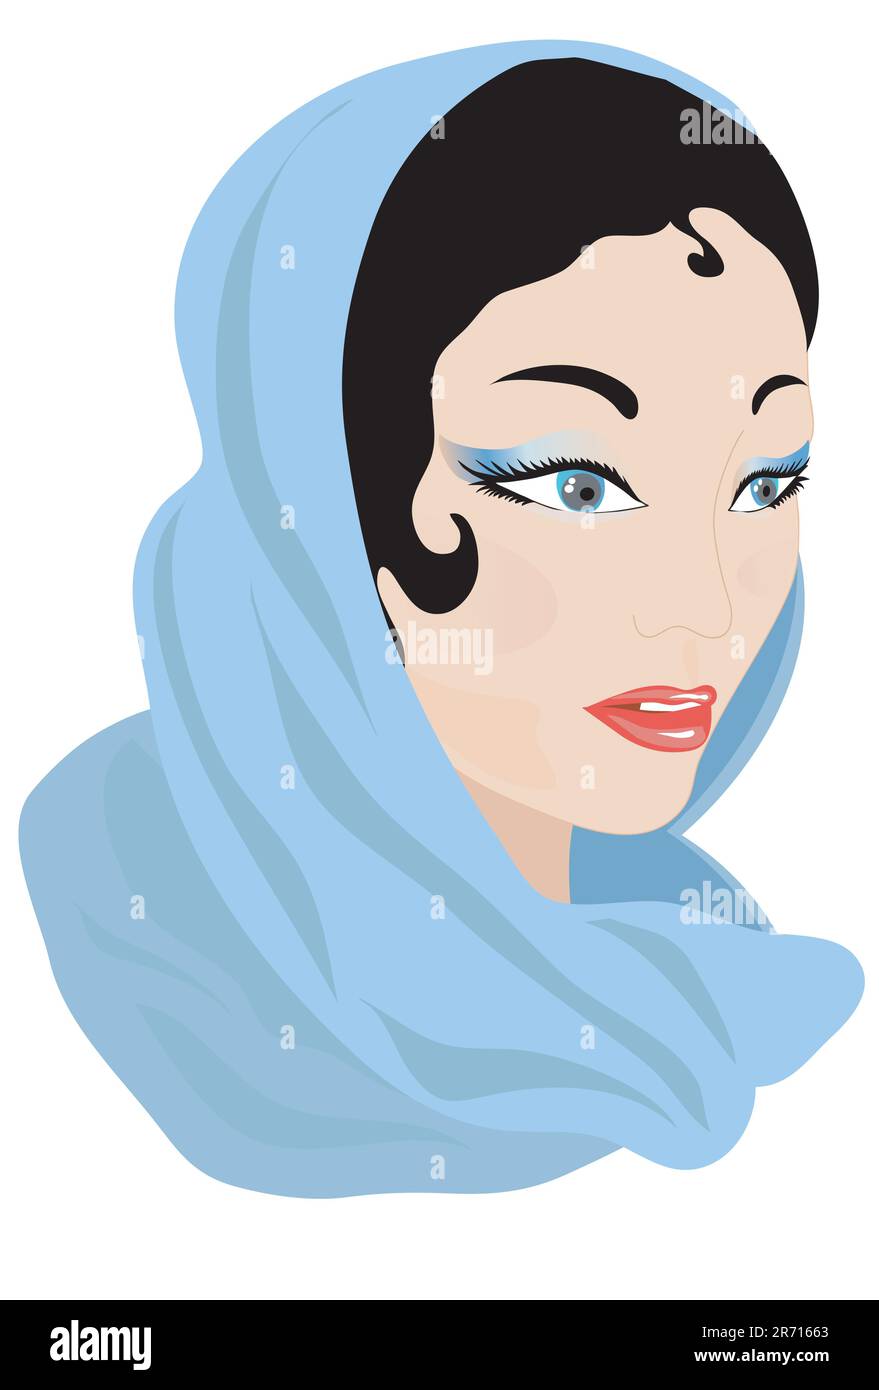 Woman in a scarf. Stock Vector